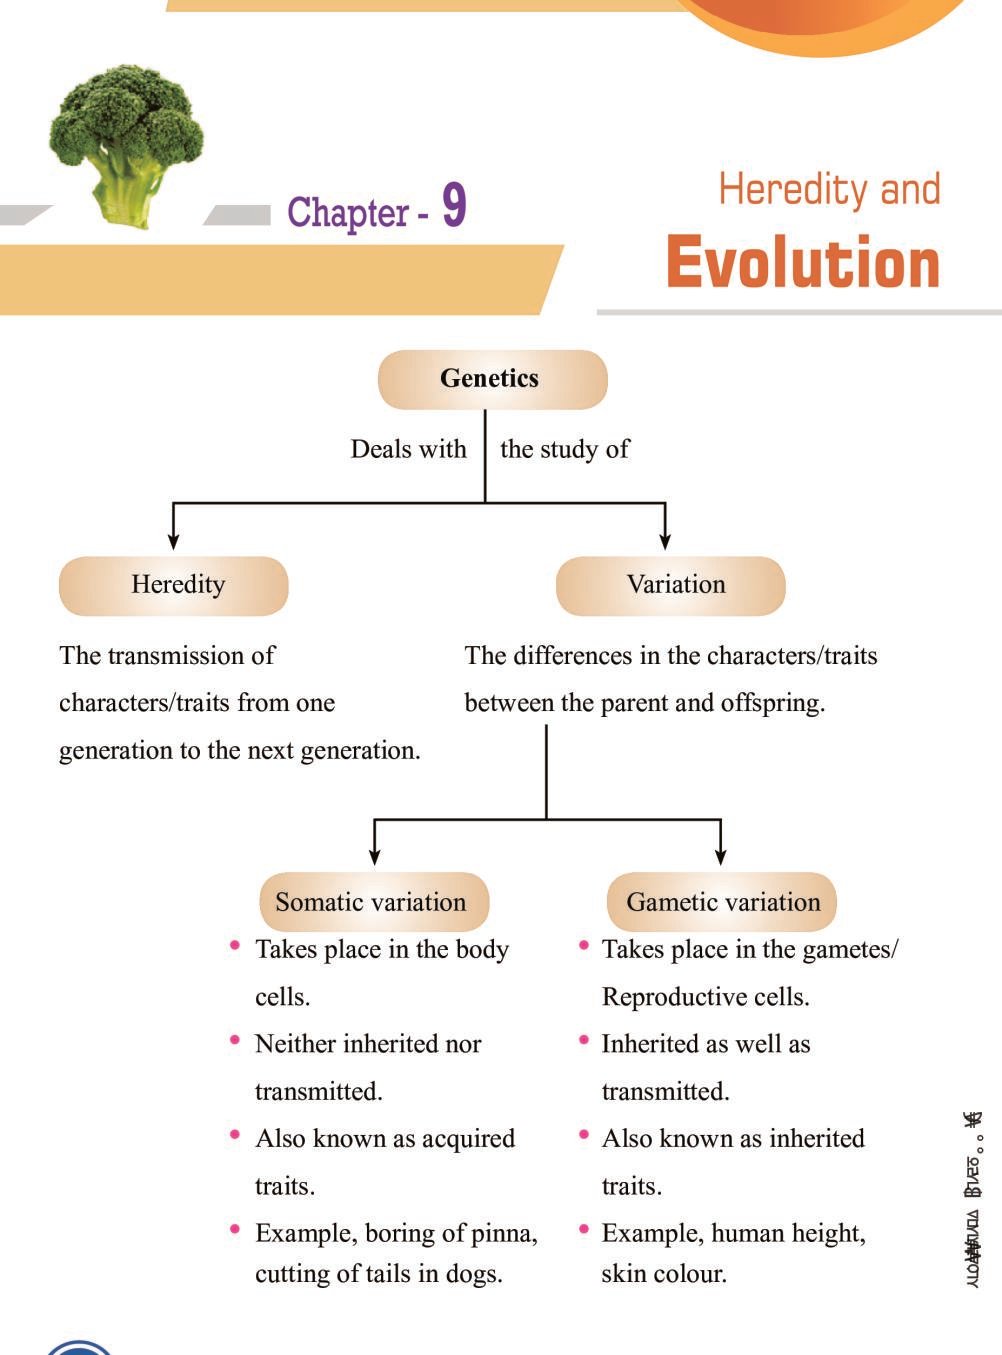 case study based questions on heredity and evolution class 10